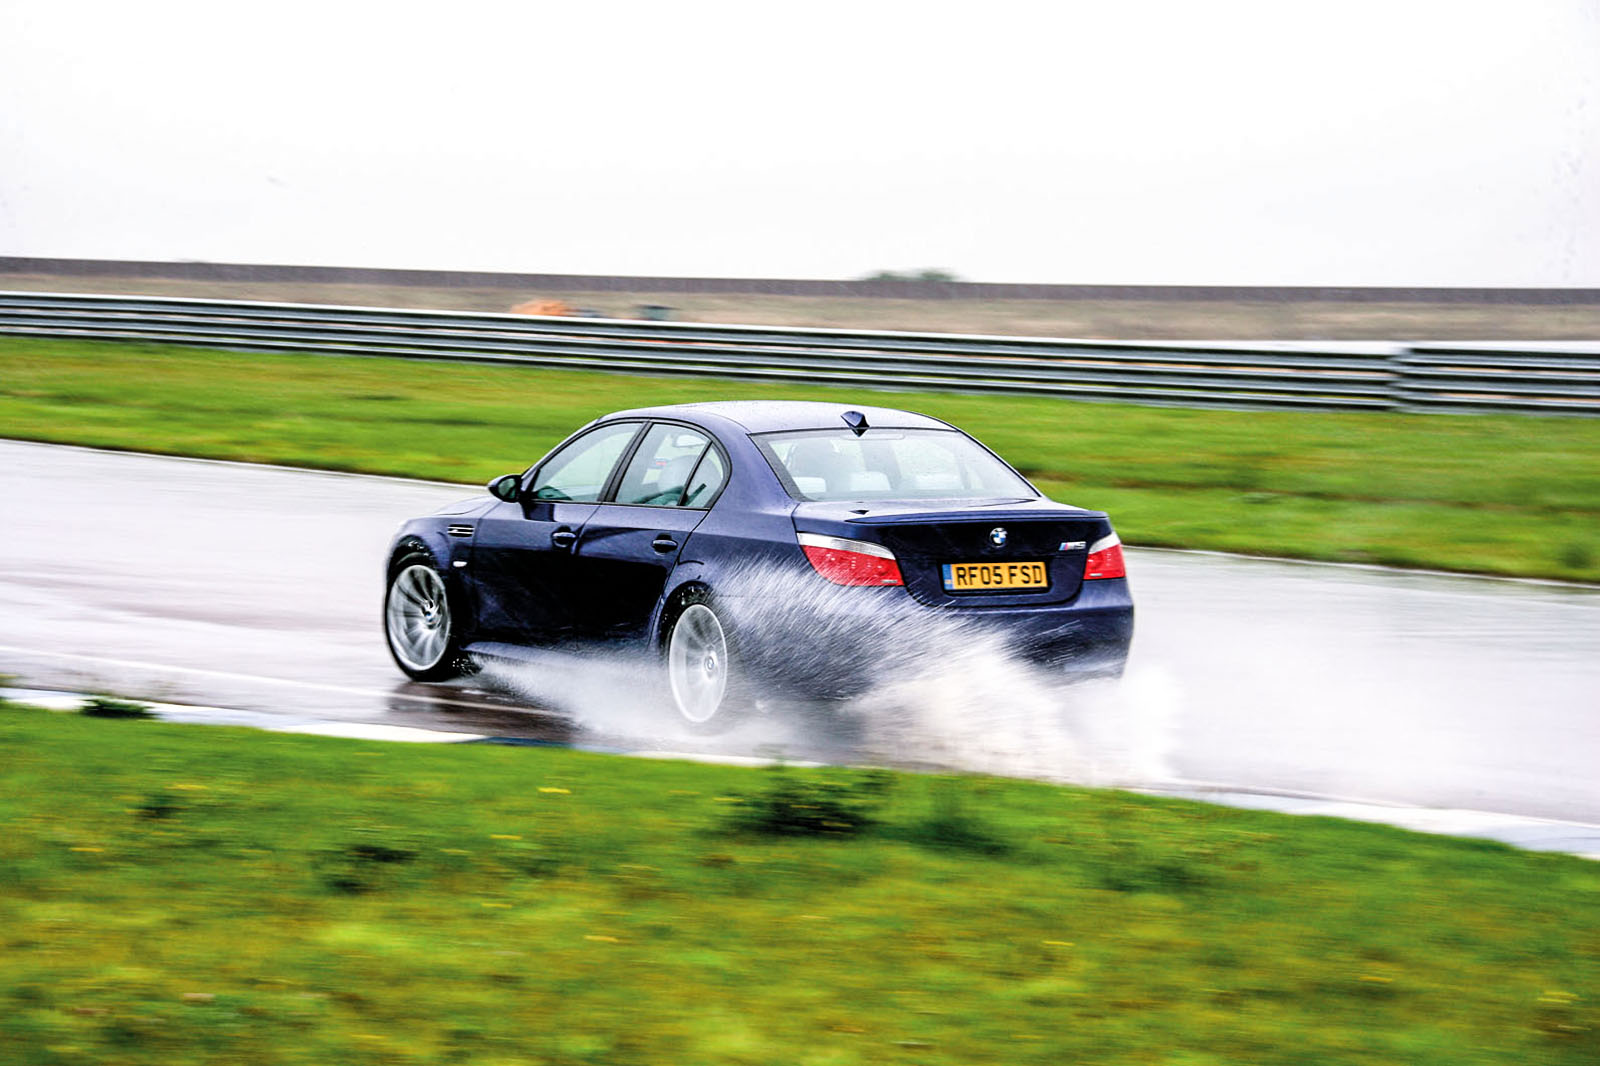 Used car buying guide: BMW M5 (E60)